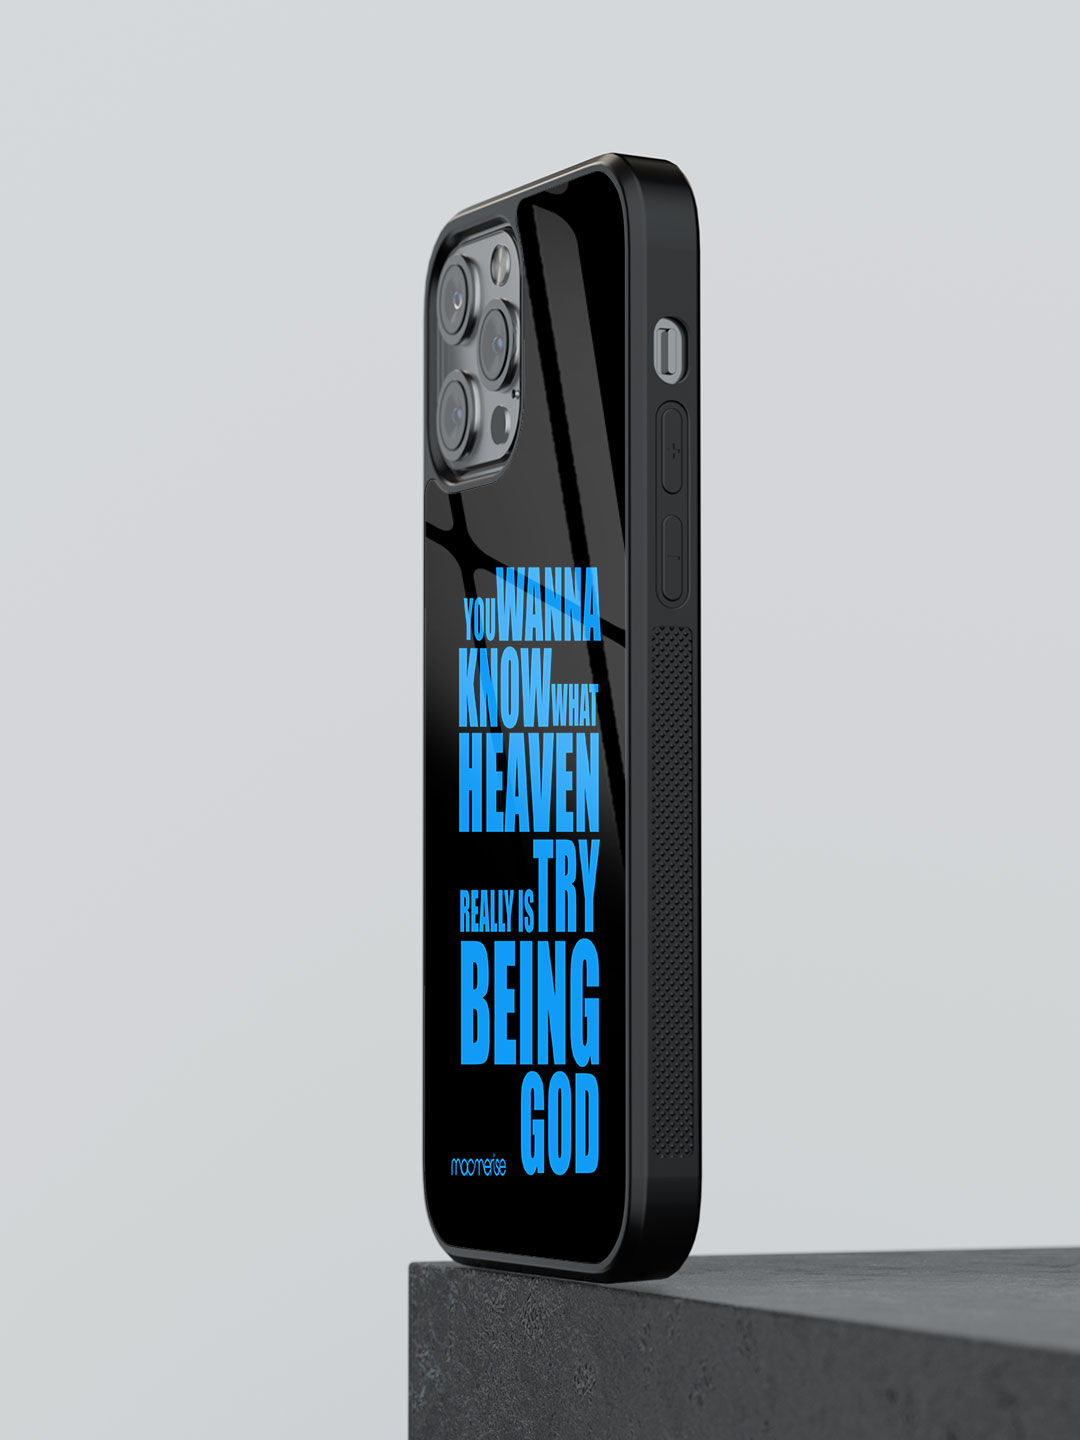 Try Being God Black - Glass Case For iPhone 13 Pro Max